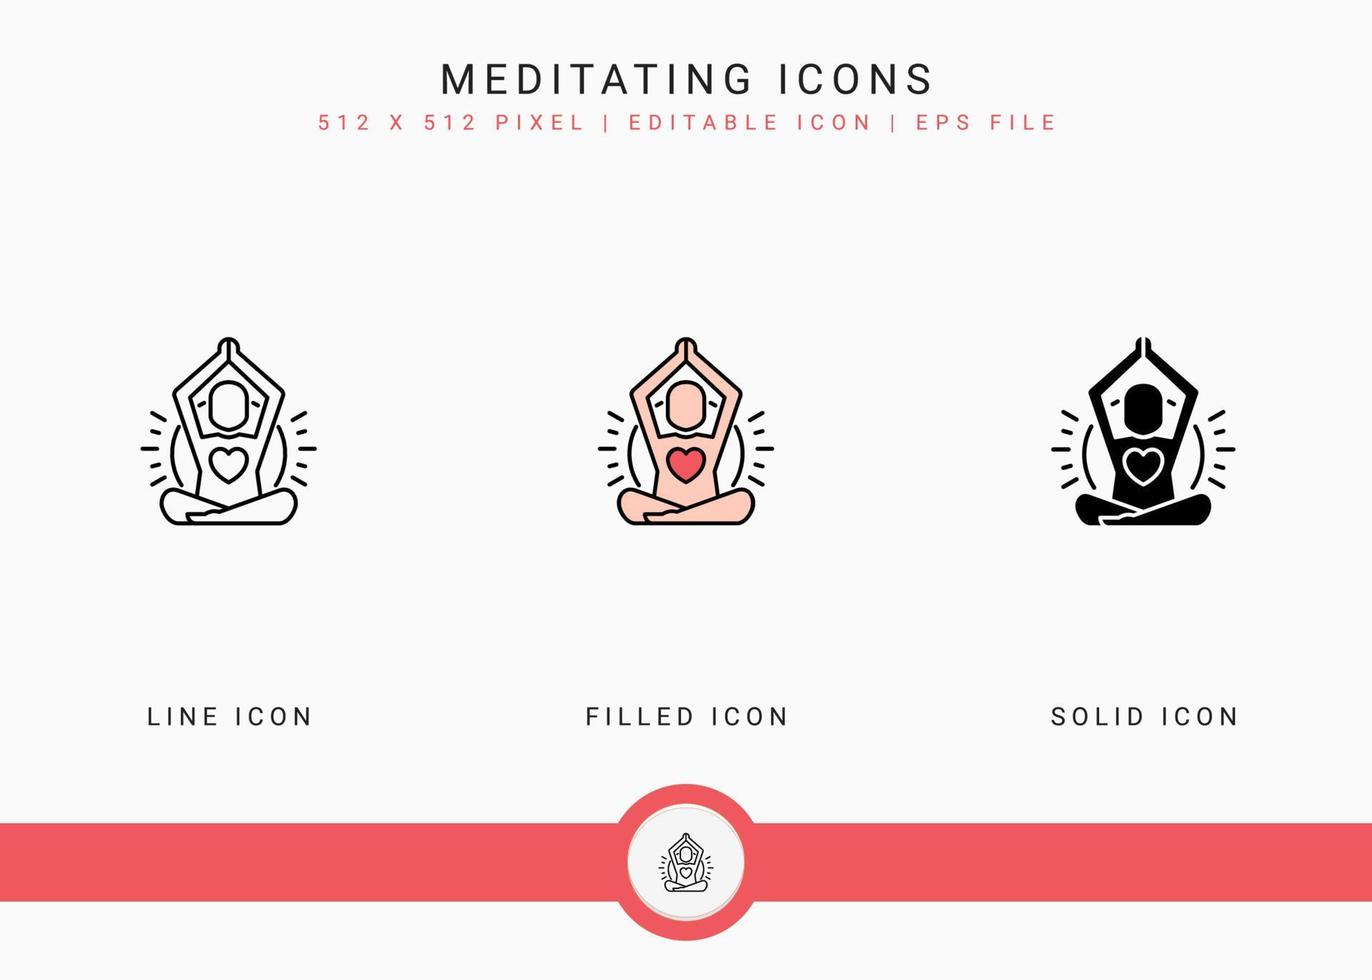 Meditating icons set vector illustration with solid icon line style. Yoga body concept. Editable stroke icon on isolated background for web design, user interface, and mobile app